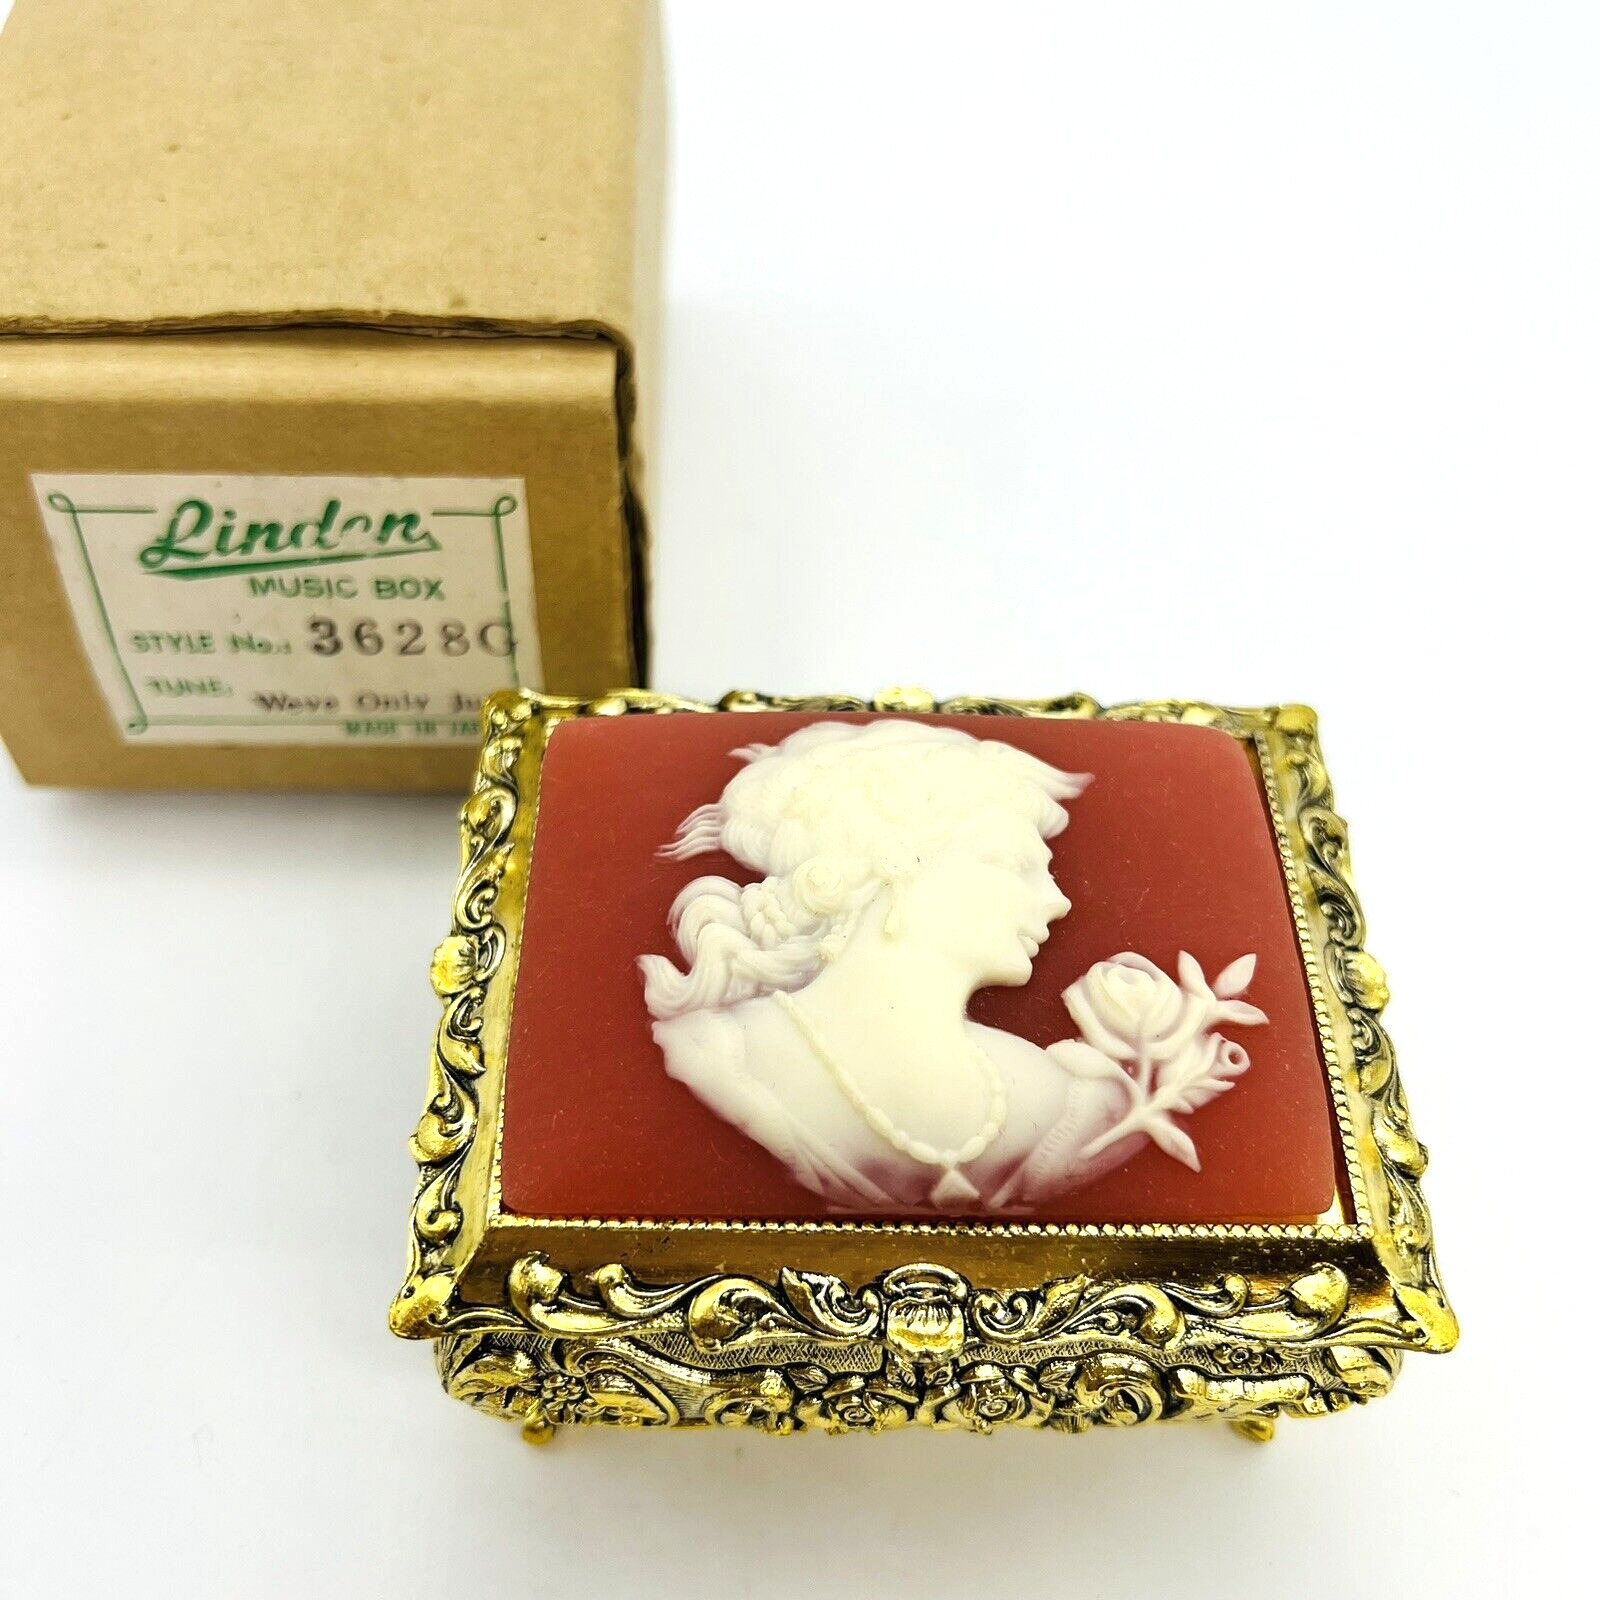 Vtg Linden Music Trinket / Jewelry Box Pink/Gold with Cameo - Original Box